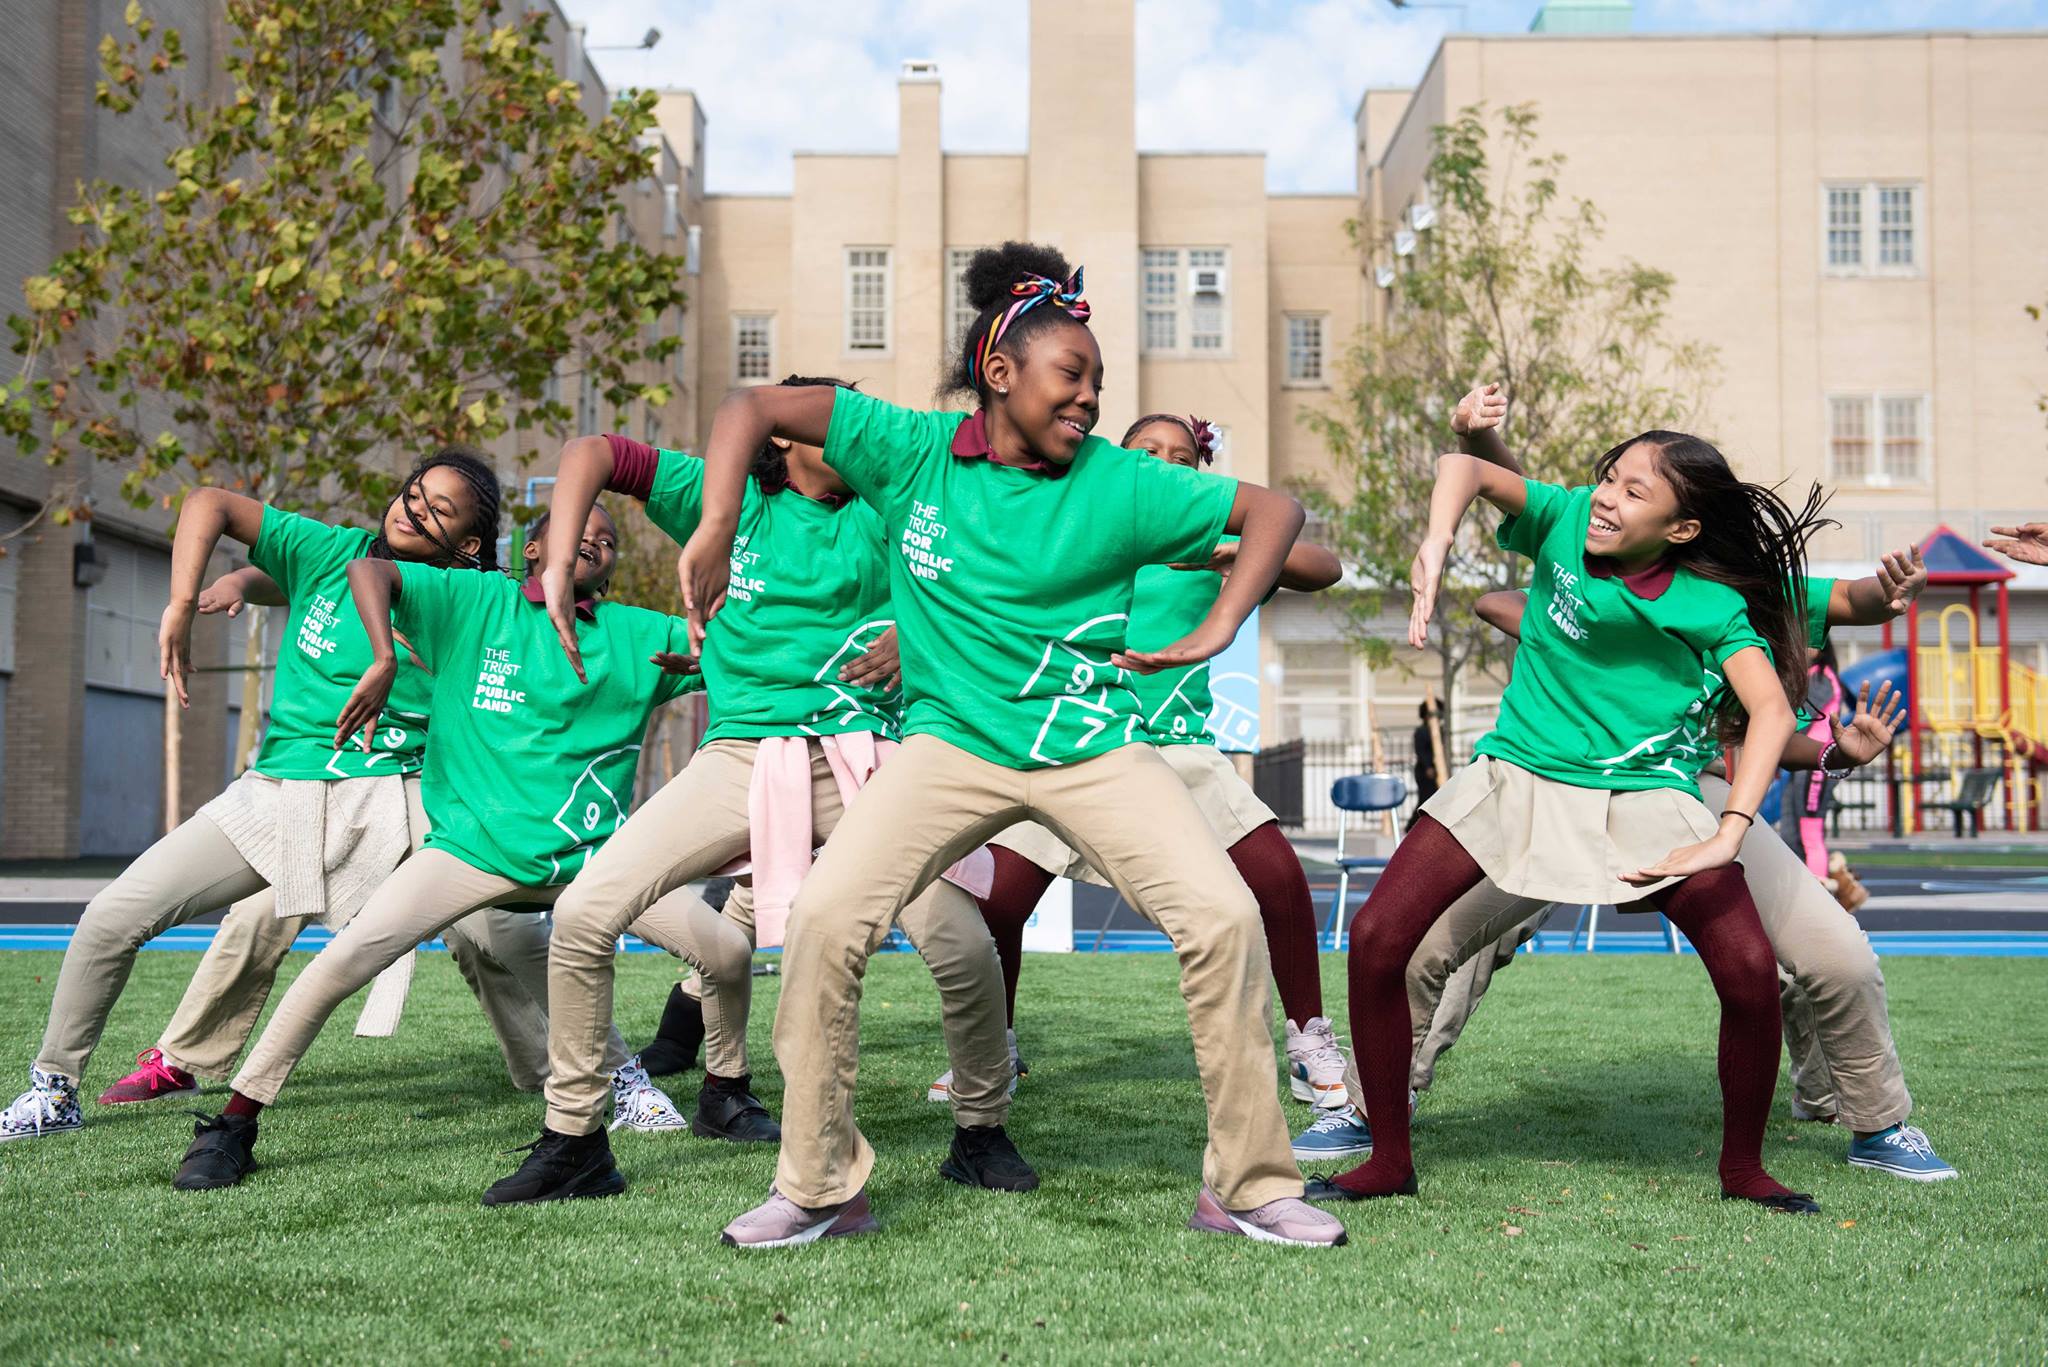 Students dance on a playground